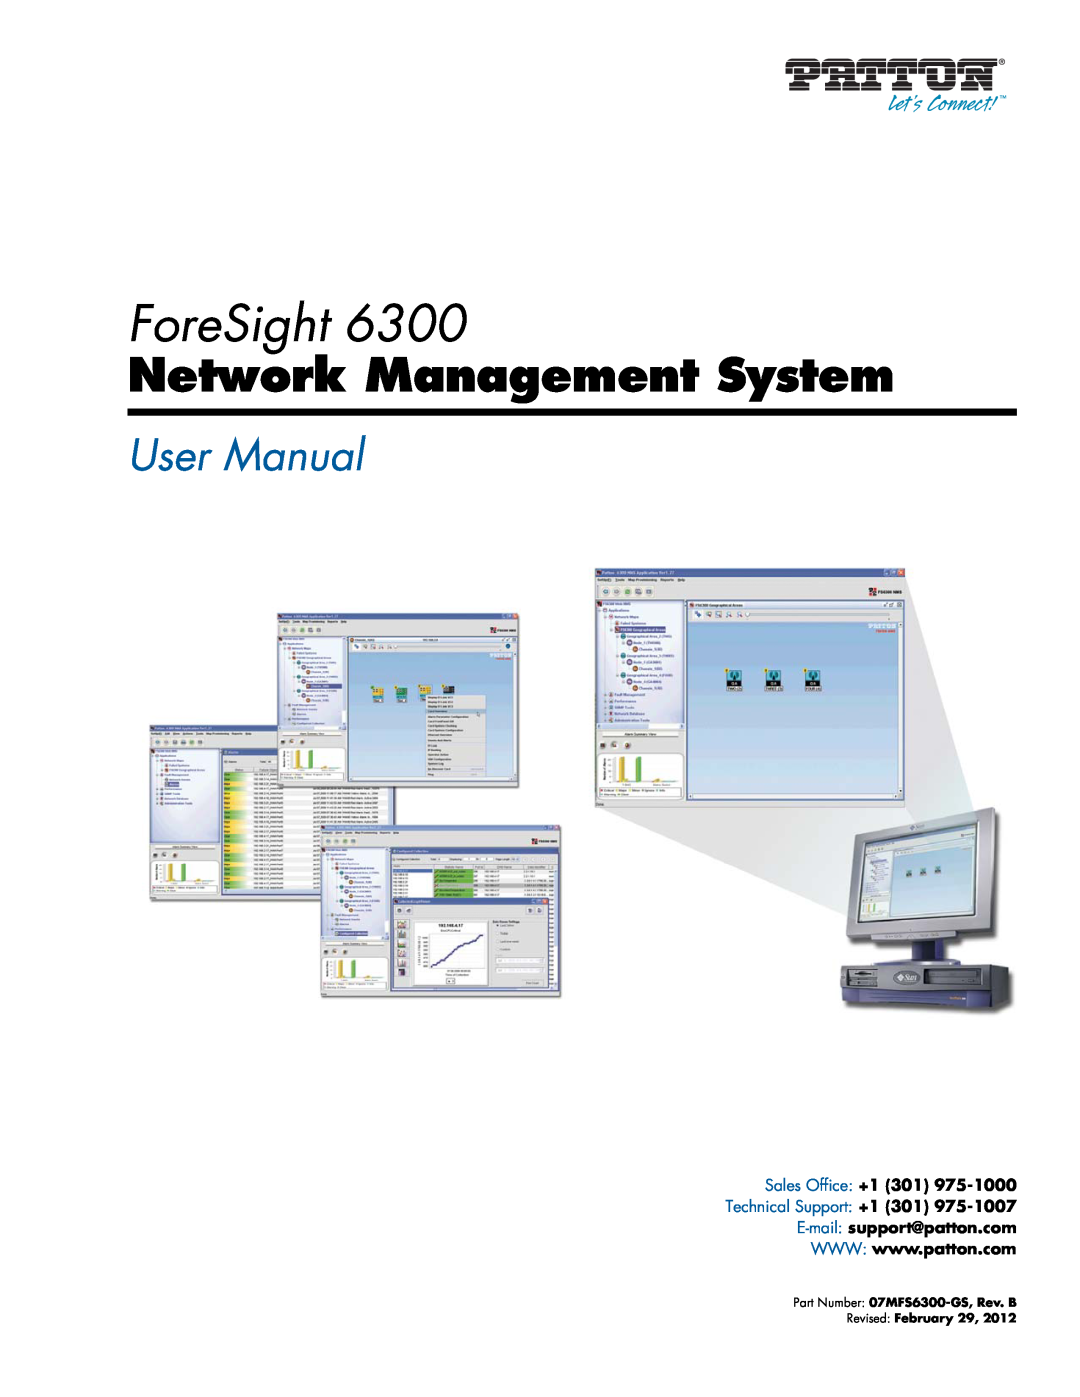 Patton electronic 6300 user manual ForeSight, Network Management System, User Manual, Sales Office +1 301 